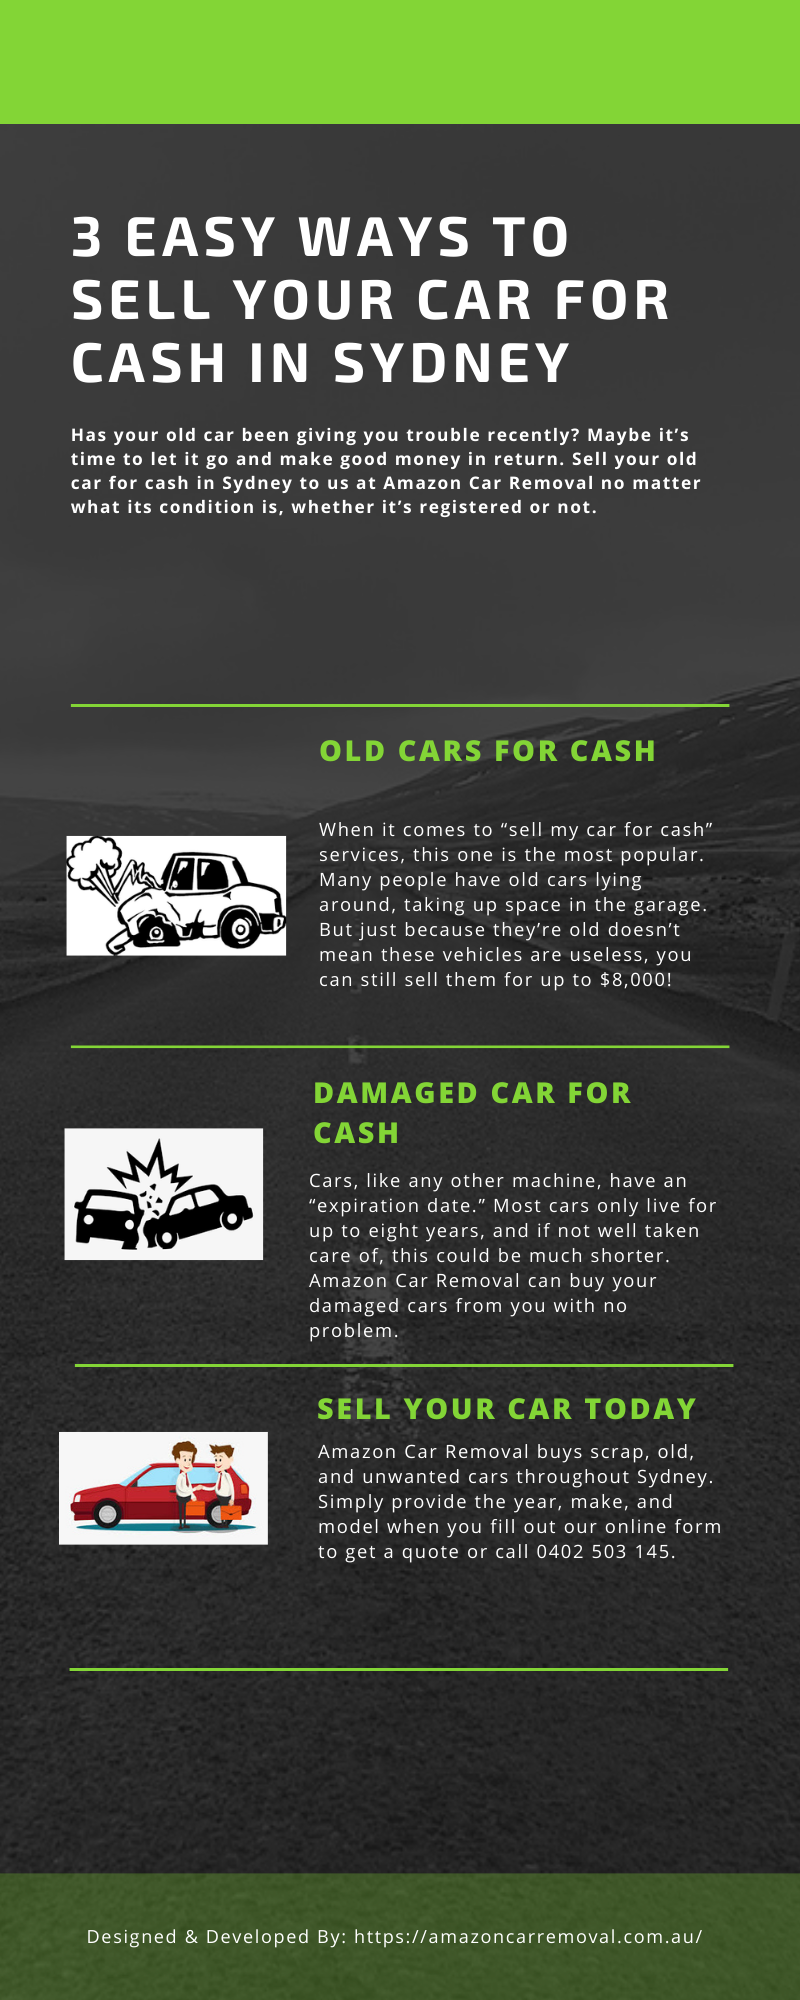 3 Easy Ways to Sell Your Car for Cash in Sydney.png  by amazoncarremoval